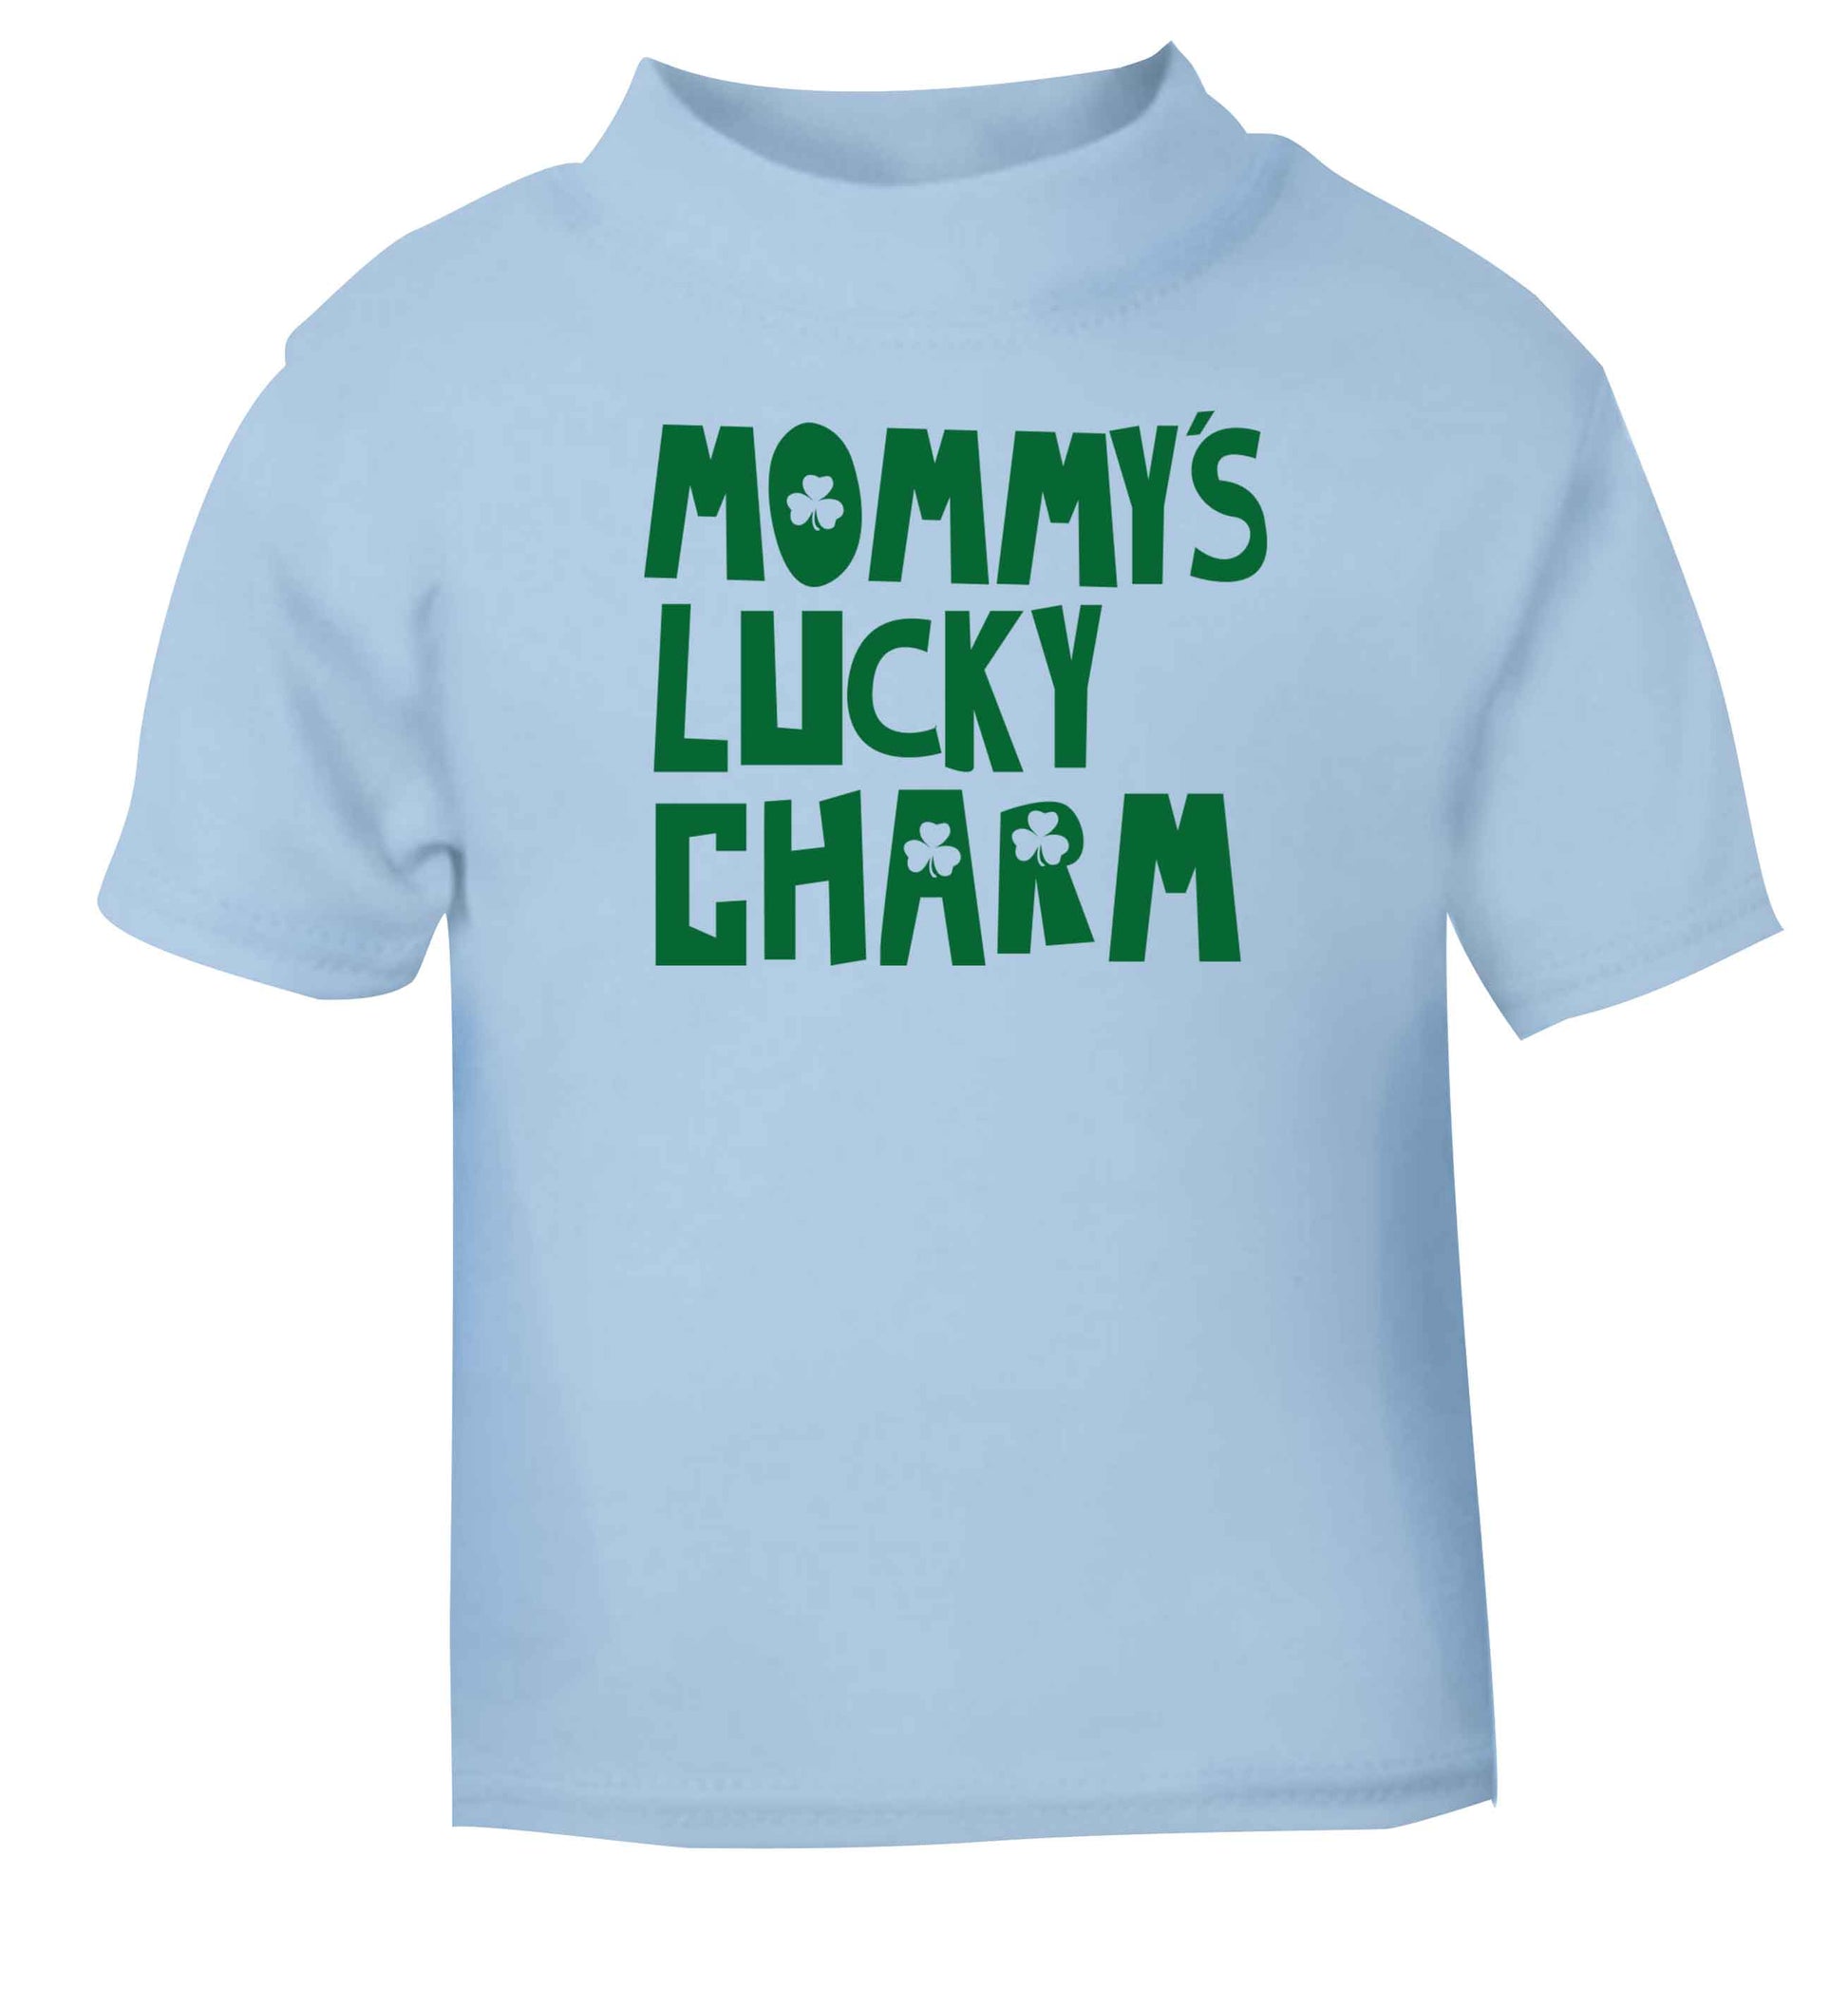 Mommy's lucky charm light blue baby toddler Tshirt 2 Years